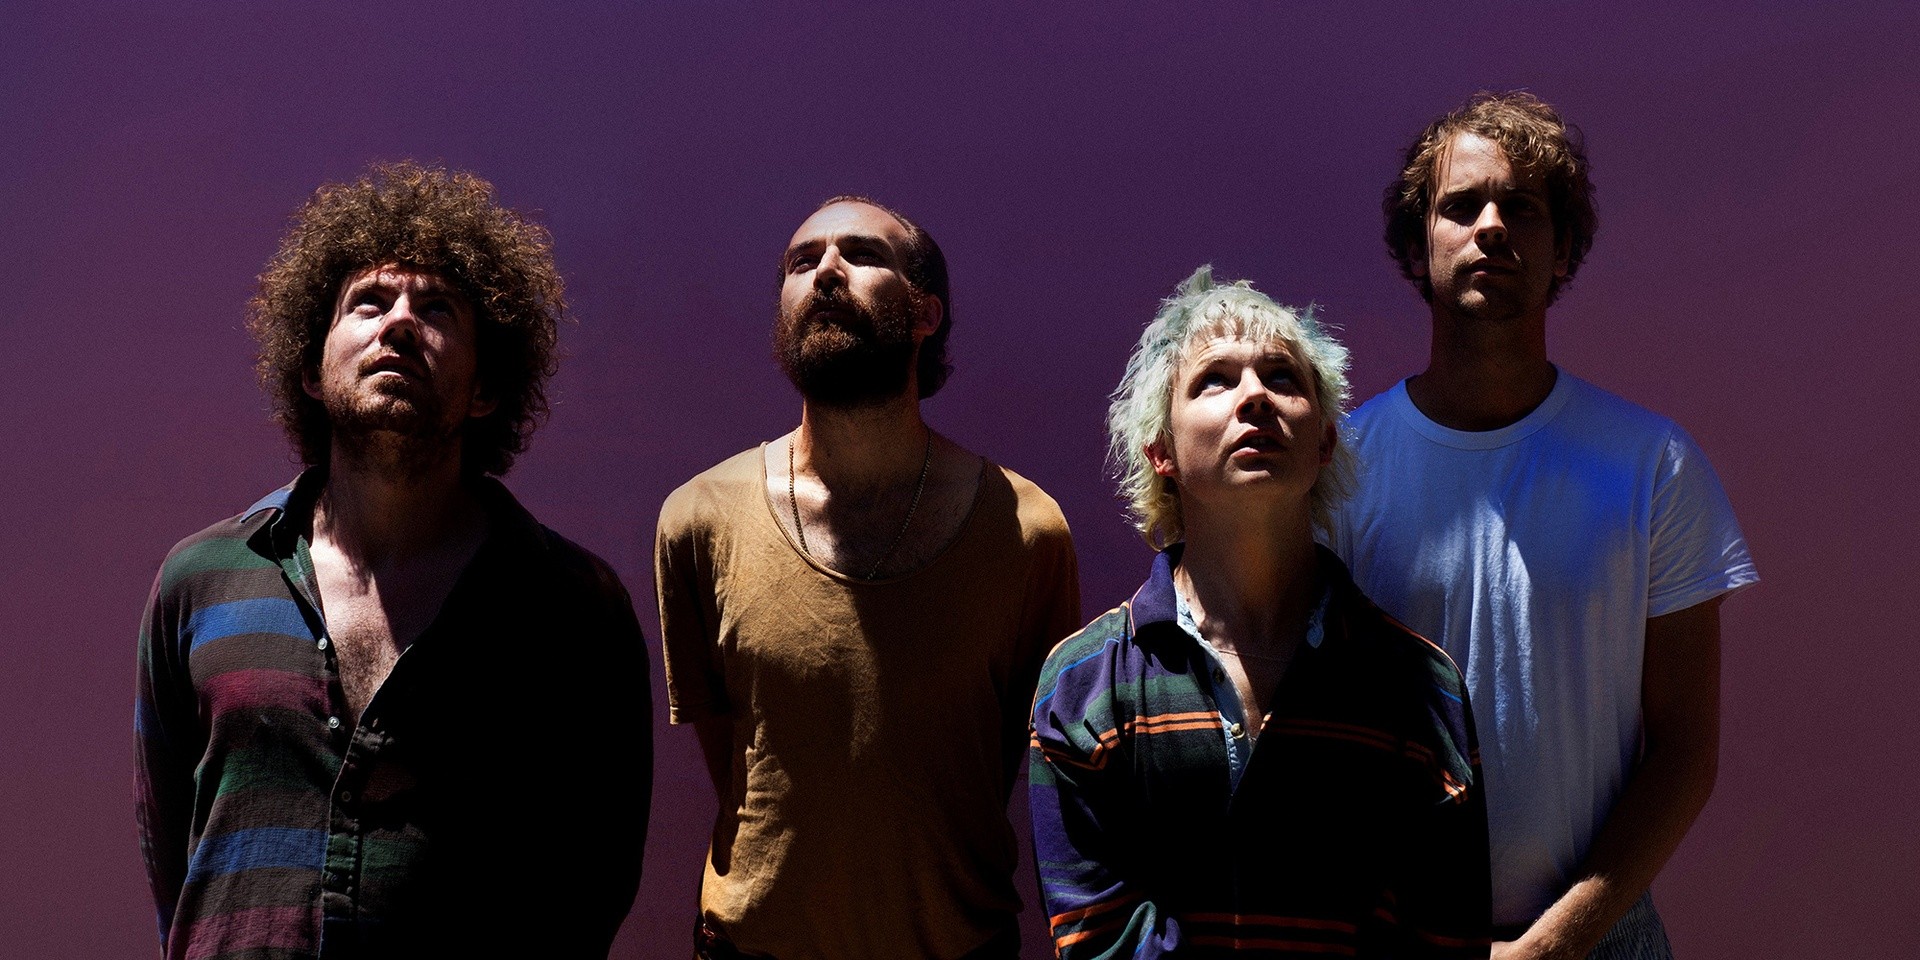 Psychedelic rock band POND are returning to Singapore